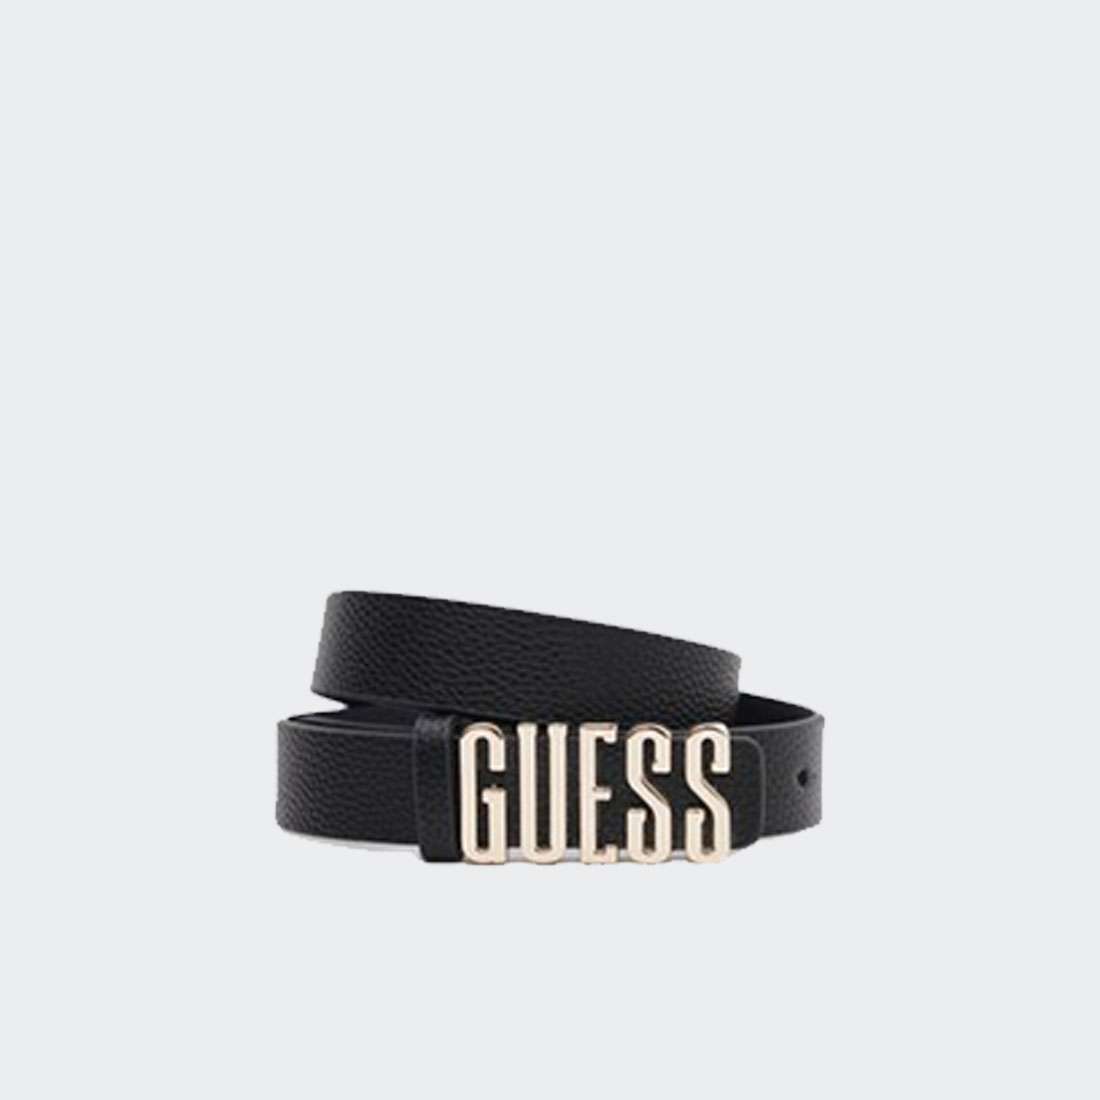 CINTO GUESS NOELLE BLACK